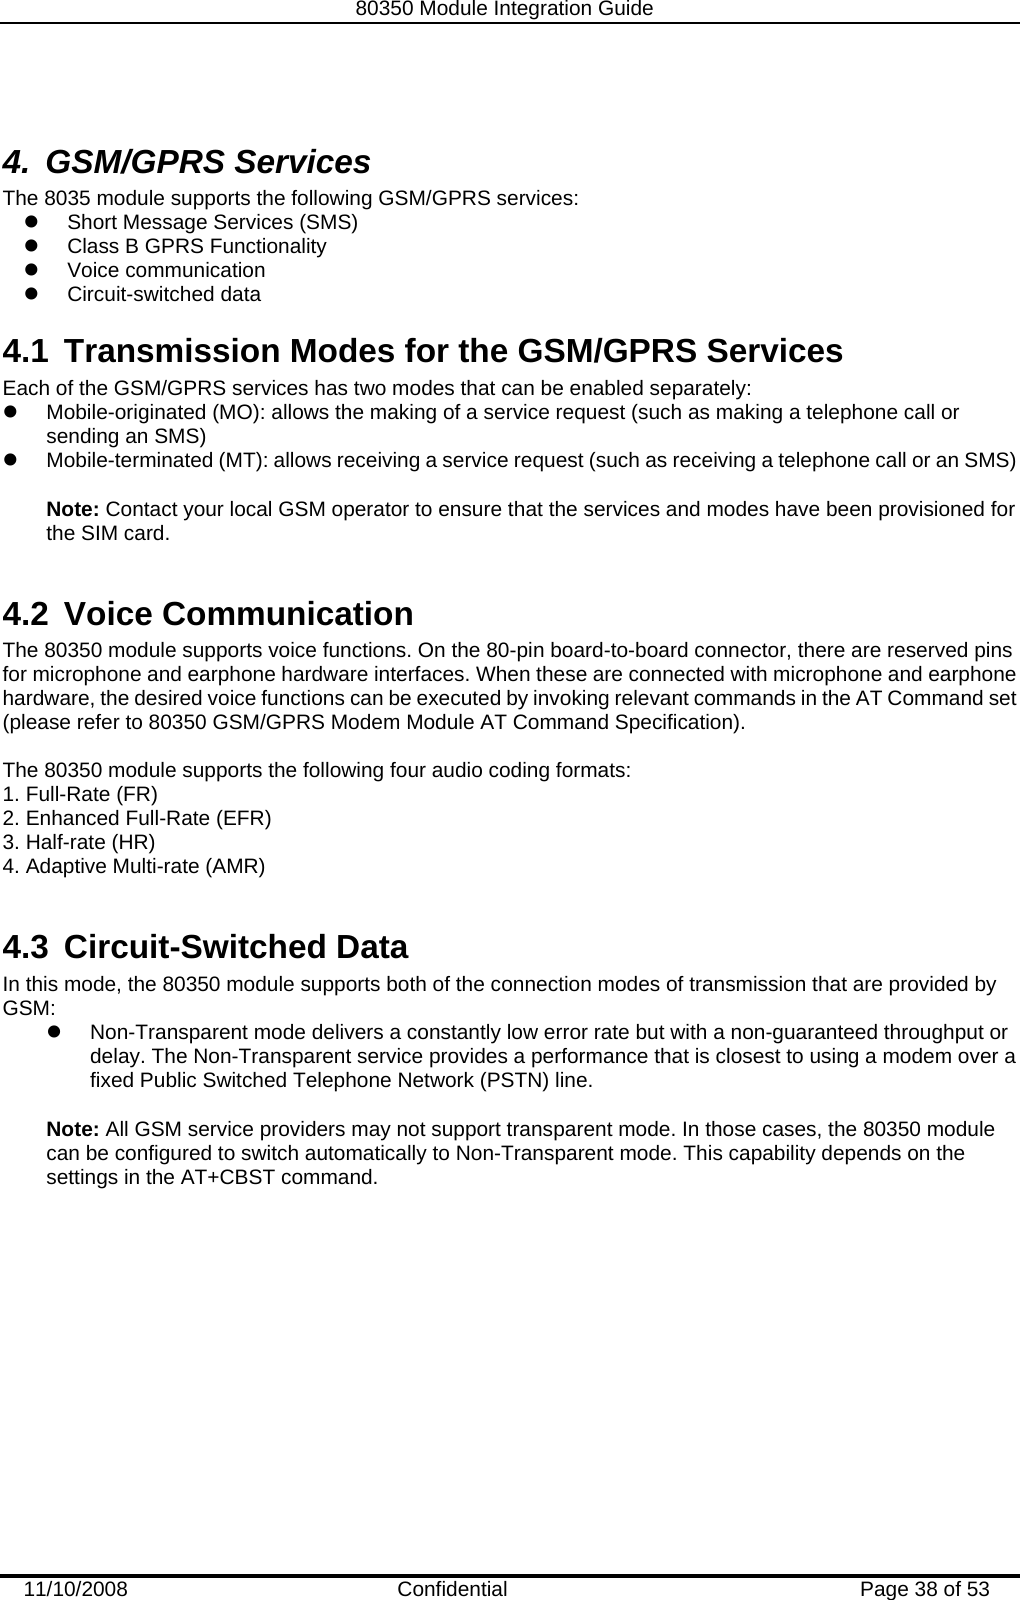   80350 Module Integration Guide  11/10/2008    Confidential  Page 38 of 53  4. GSM/GPRS Services The 8035 module supports the following GSM/GPRS services: z  Short Message Services (SMS) z  Class B GPRS Functionality z Voice communication z Circuit-switched data 4.1  Transmission Modes for the GSM/GPRS Services Each of the GSM/GPRS services has two modes that can be enabled separately: z  Mobile-originated (MO): allows the making of a service request (such as making a telephone call or sending an SMS) z  Mobile-terminated (MT): allows receiving a service request (such as receiving a telephone call or an SMS)  Note: Contact your local GSM operator to ensure that the services and modes have been provisioned for the SIM card.  4.2 Voice Communication The 80350 module supports voice functions. On the 80-pin board-to-board connector, there are reserved pins for microphone and earphone hardware interfaces. When these are connected with microphone and earphone hardware, the desired voice functions can be executed by invoking relevant commands in the AT Command set (please refer to 80350 GSM/GPRS Modem Module AT Command Specification).  The 80350 module supports the following four audio coding formats: 1. Full-Rate (FR) 2. Enhanced Full-Rate (EFR) 3. Half-rate (HR)  4. Adaptive Multi-rate (AMR)  4.3 Circuit-Switched Data In this mode, the 80350 module supports both of the connection modes of transmission that are provided by GSM: z  Non-Transparent mode delivers a constantly low error rate but with a non-guaranteed throughput or delay. The Non-Transparent service provides a performance that is closest to using a modem over a fixed Public Switched Telephone Network (PSTN) line.  Note: All GSM service providers may not support transparent mode. In those cases, the 80350 module can be configured to switch automatically to Non-Transparent mode. This capability depends on the settings in the AT+CBST command. 